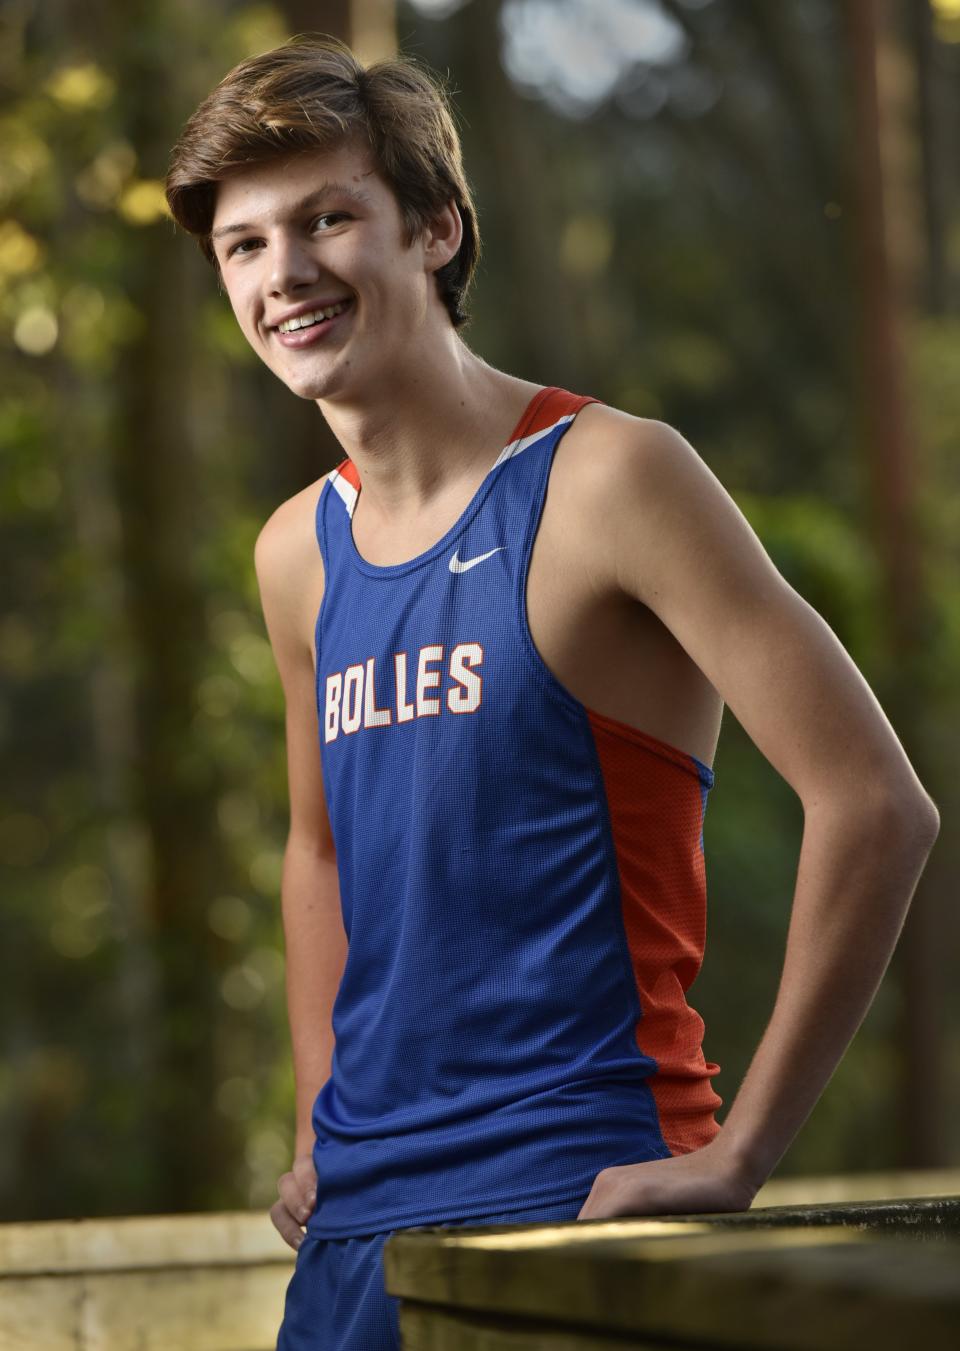 Charles Hicks, 15, of The Bolles School won the 2016 Times-Union All-First Coast Cross Country boys athlete of the year award. Photographed Thursday, December 15, 2016 in Jacksonville, Florida. [Will Dickey/Florida Times-Union]